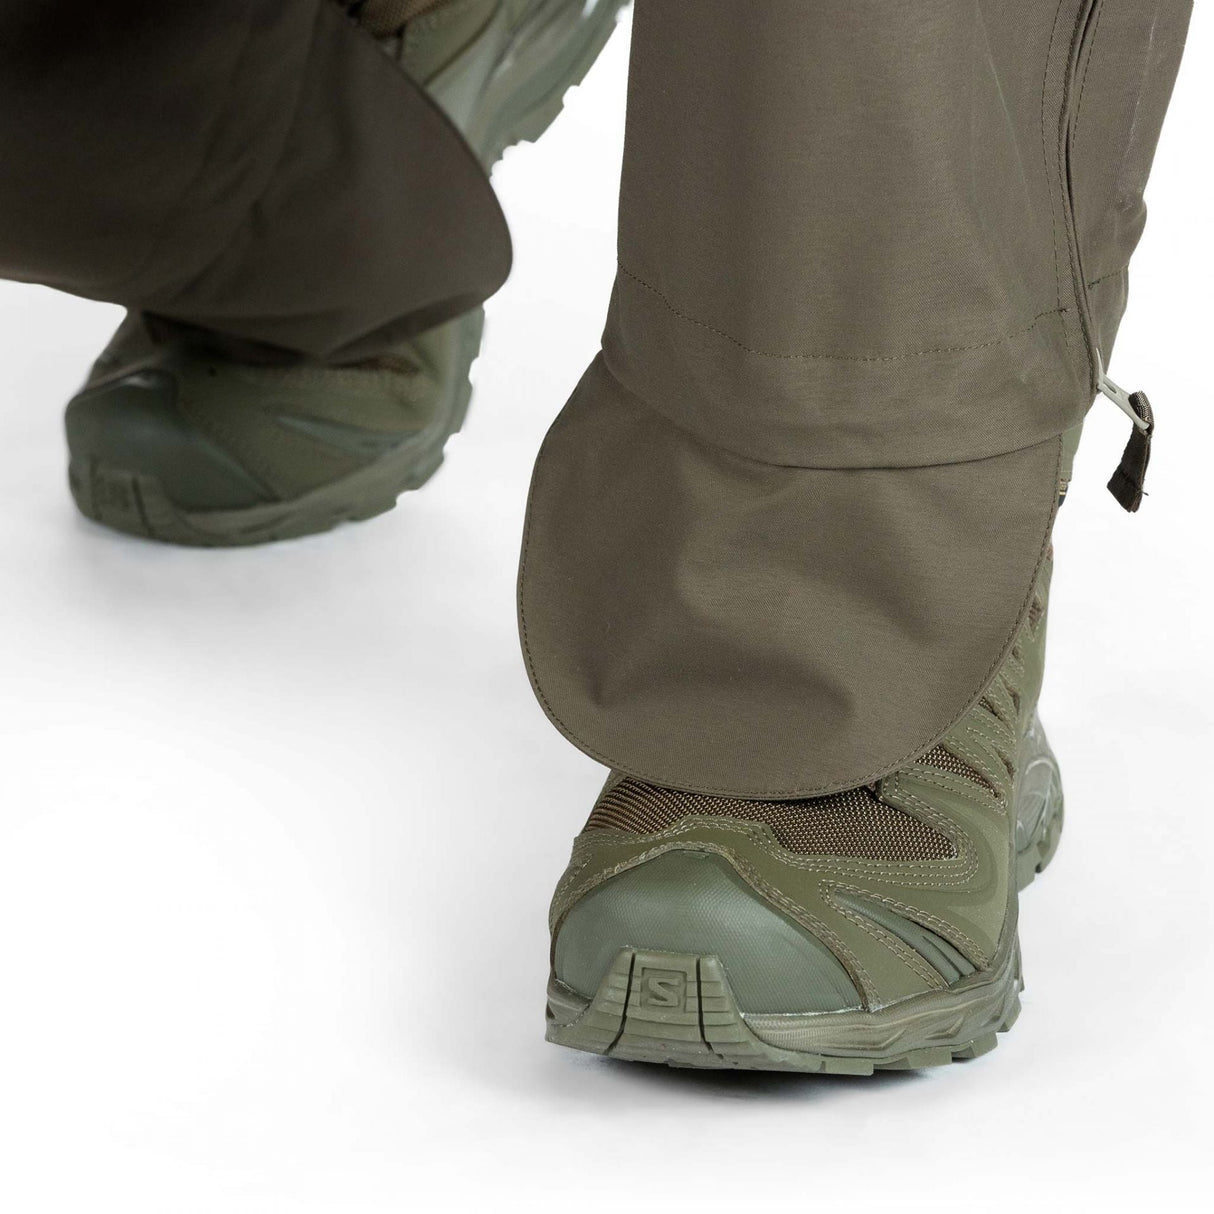 Outdoor Rain Pants: Waterproof tactical pants with detachable suspenders and boot-hooked shoe covers.